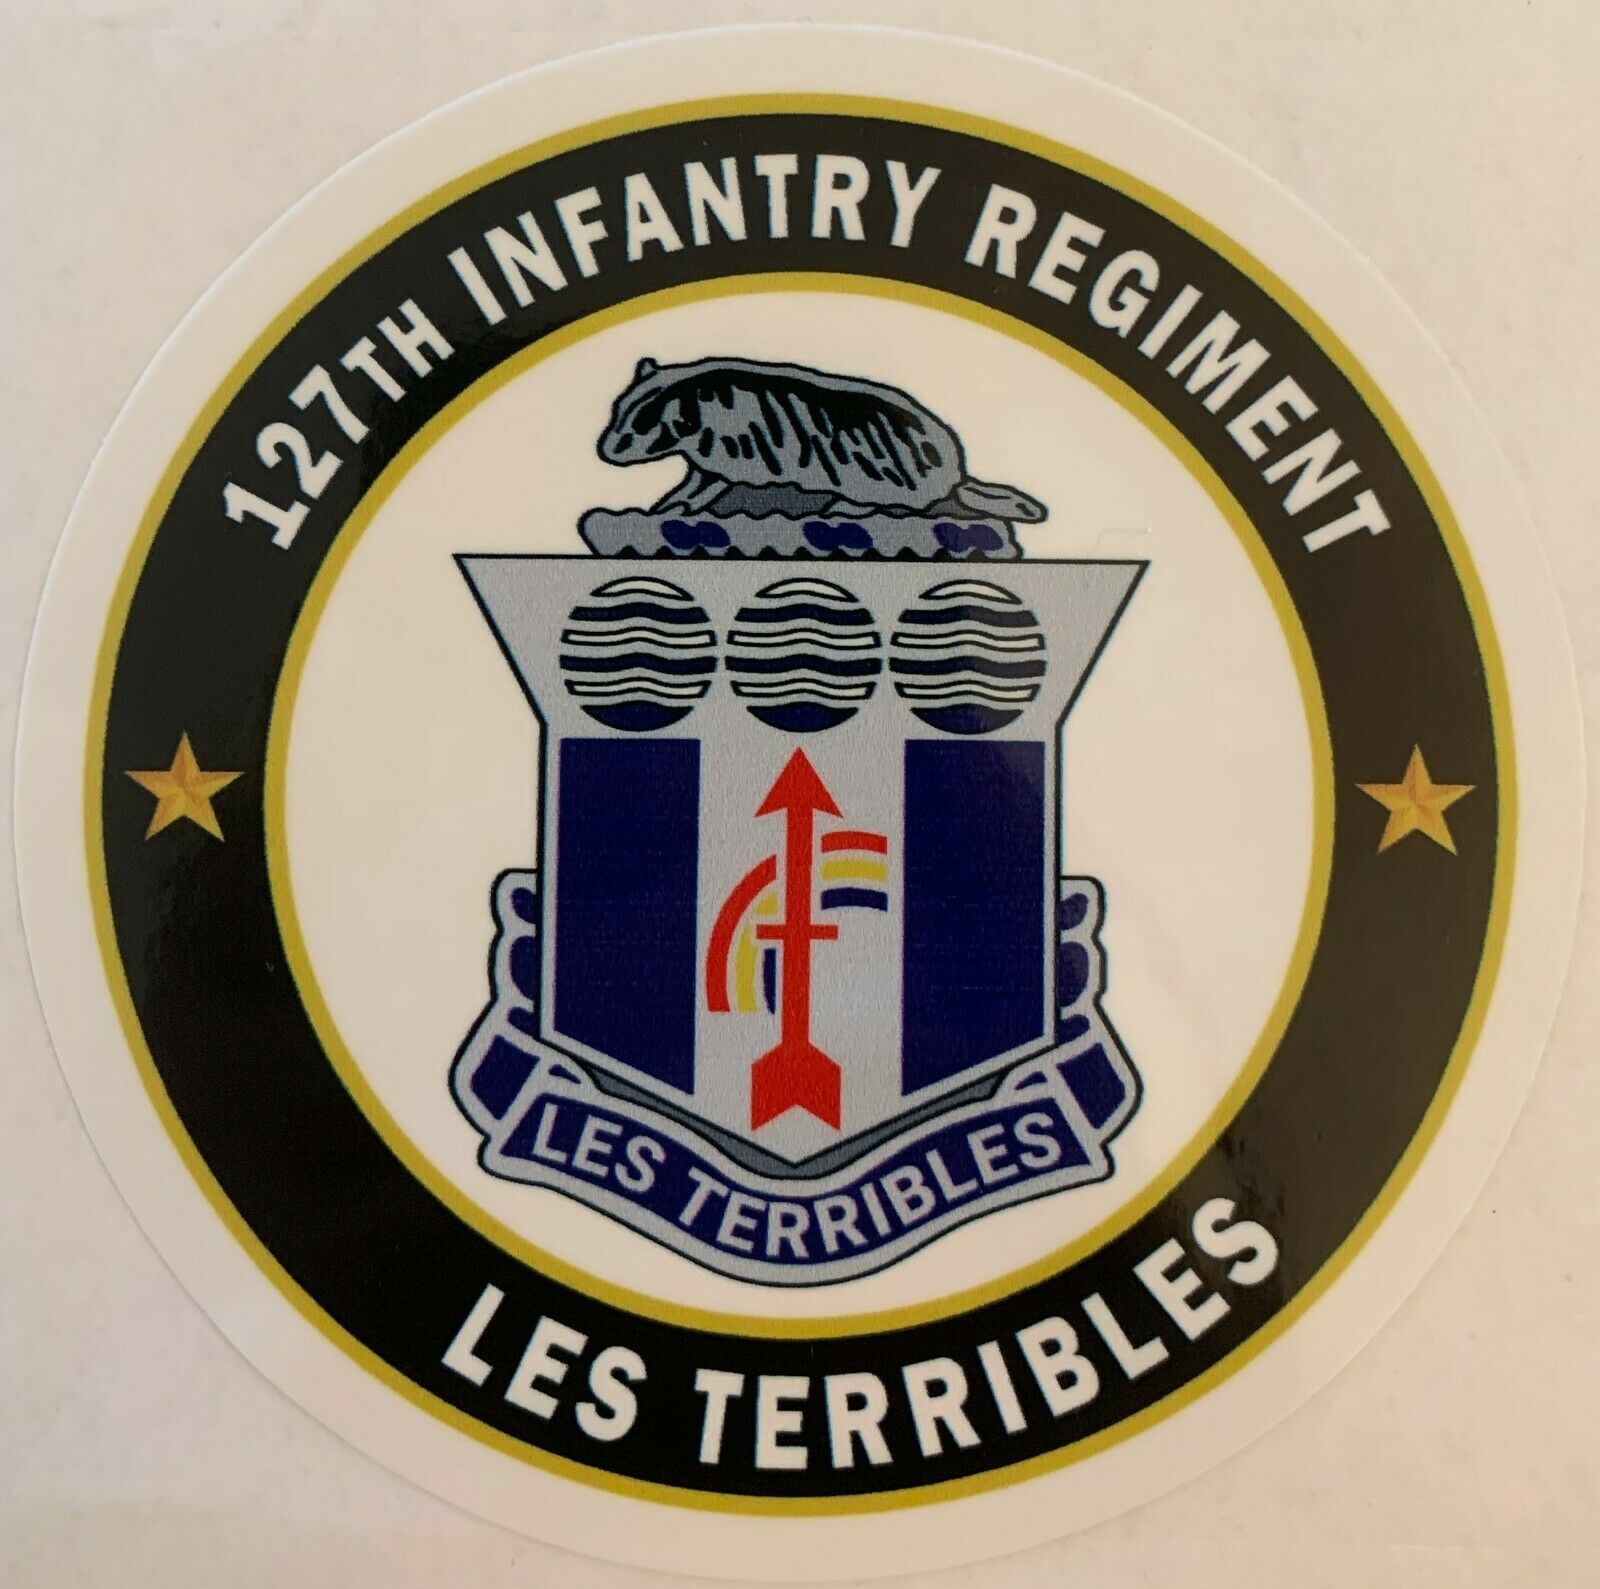 Us Army 127th Infantry Regiment "les Terribles" Sticker Waterproof D592